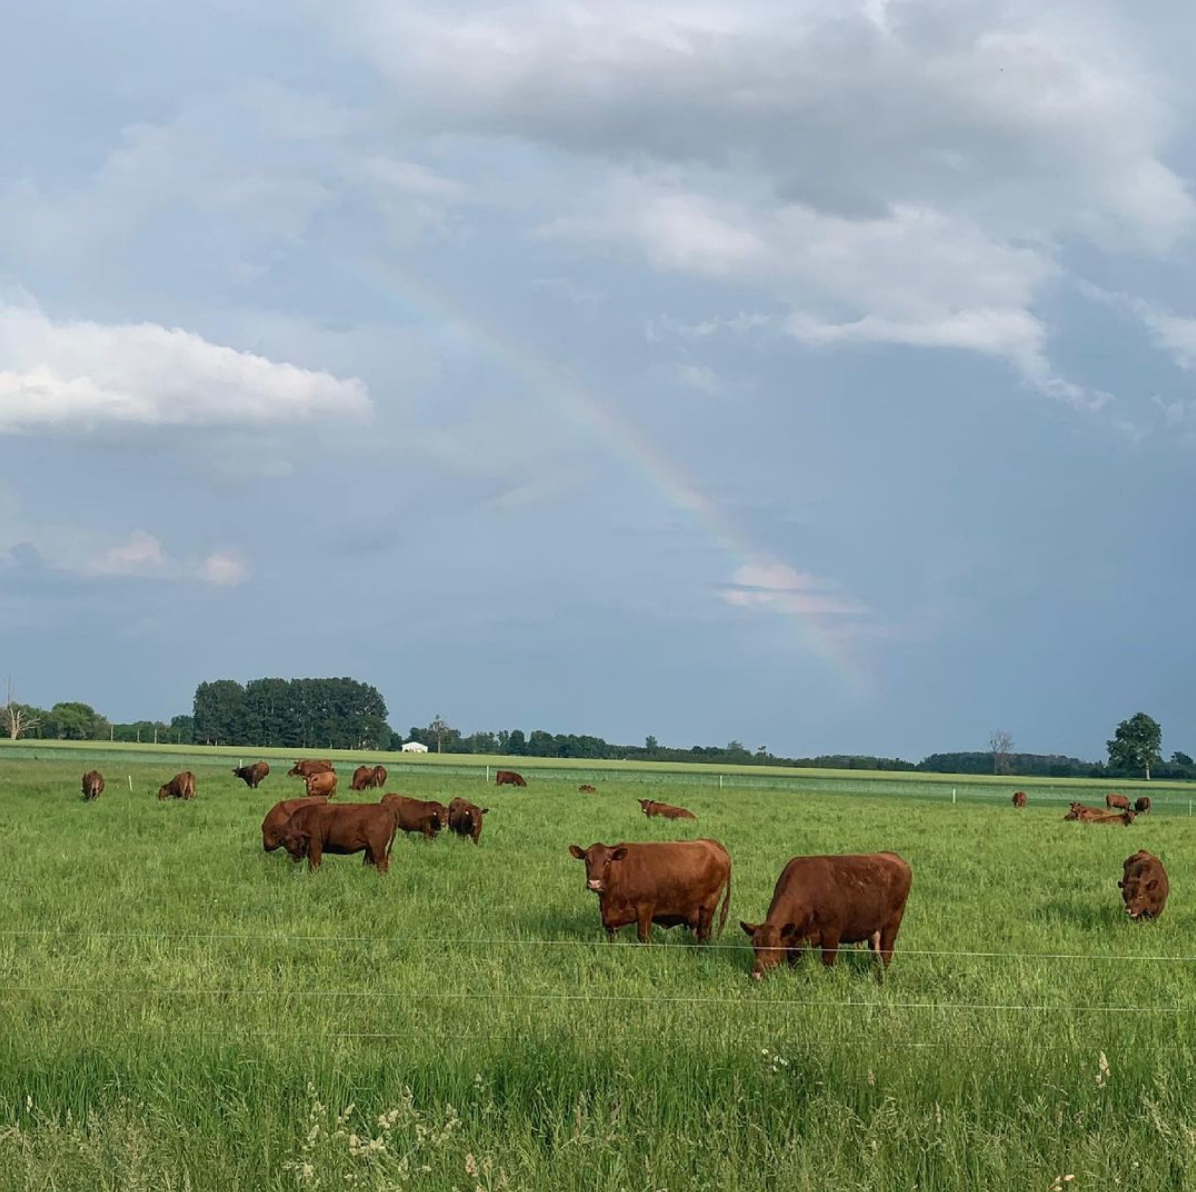 Cows grazing on pasture. A rainbow can be seen in the sky.